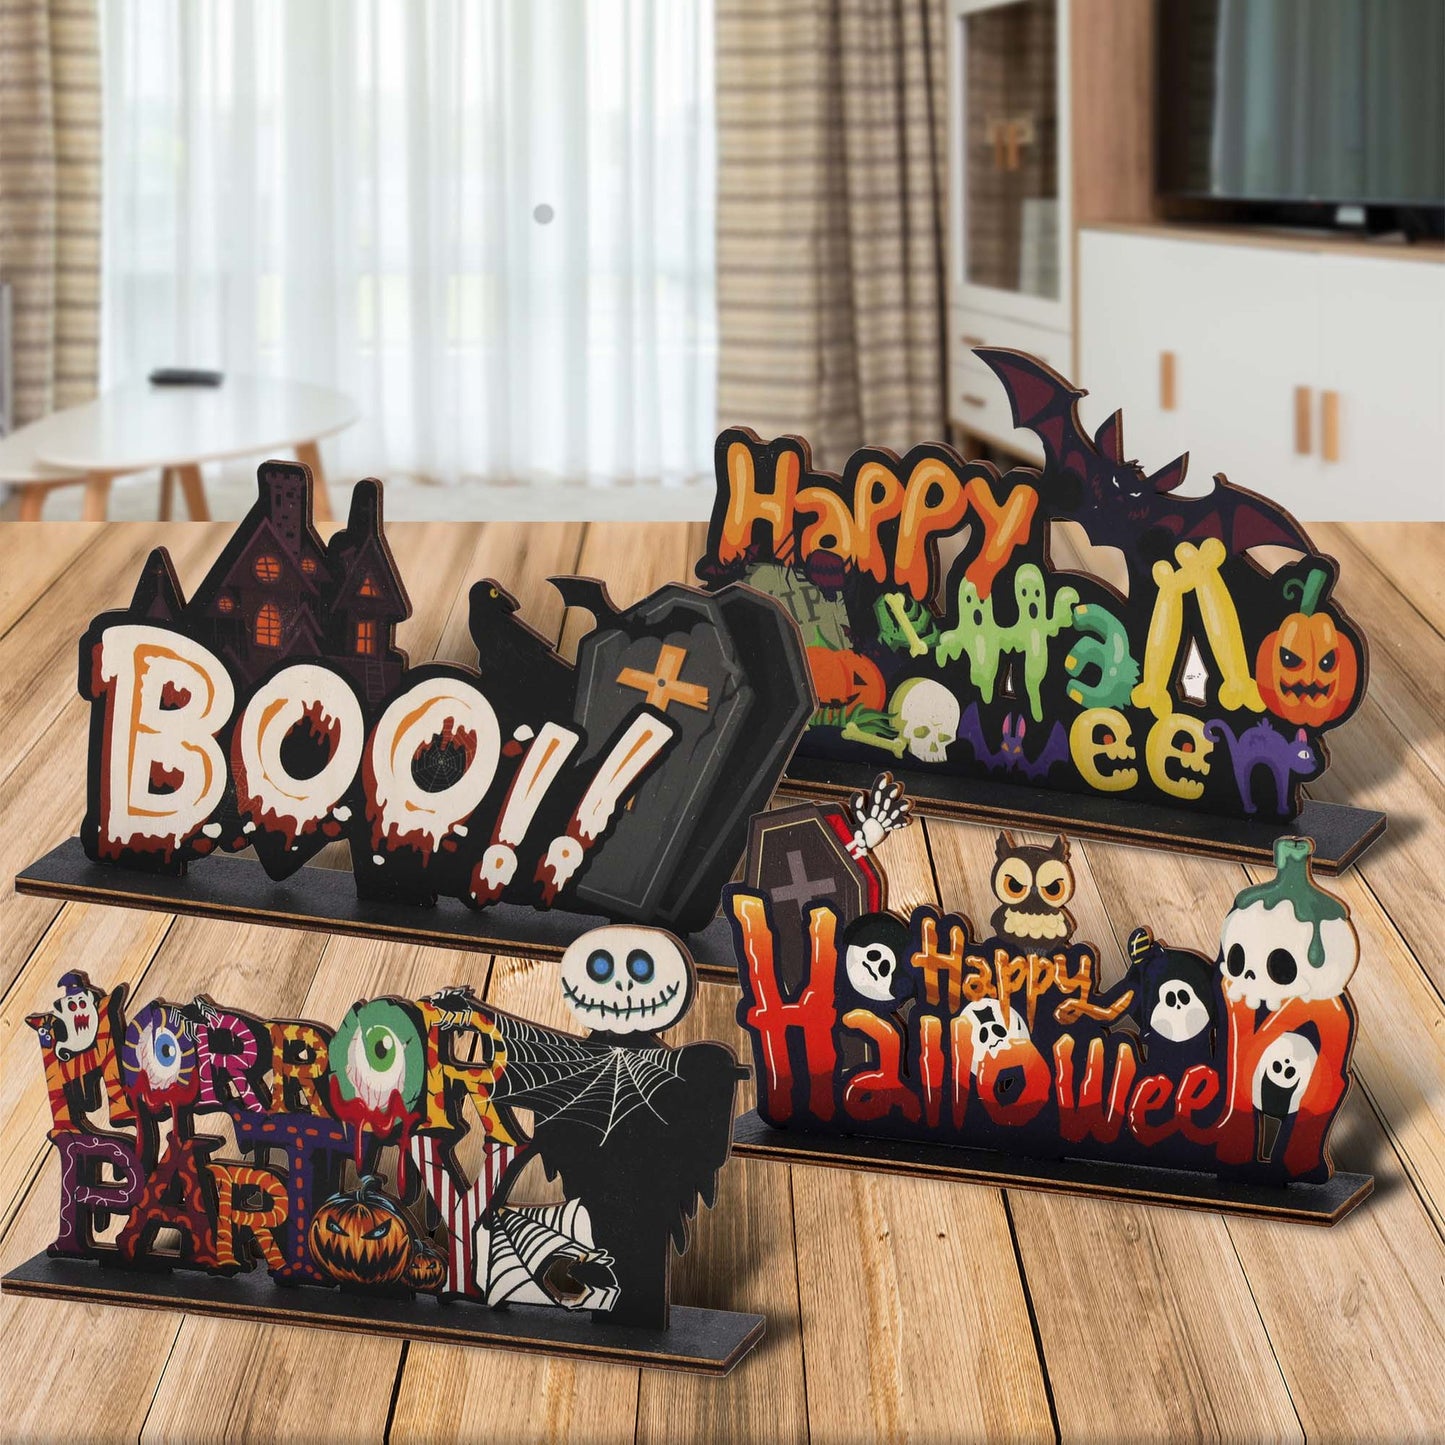 Halloween wooden decoration ghost grave 11-pack